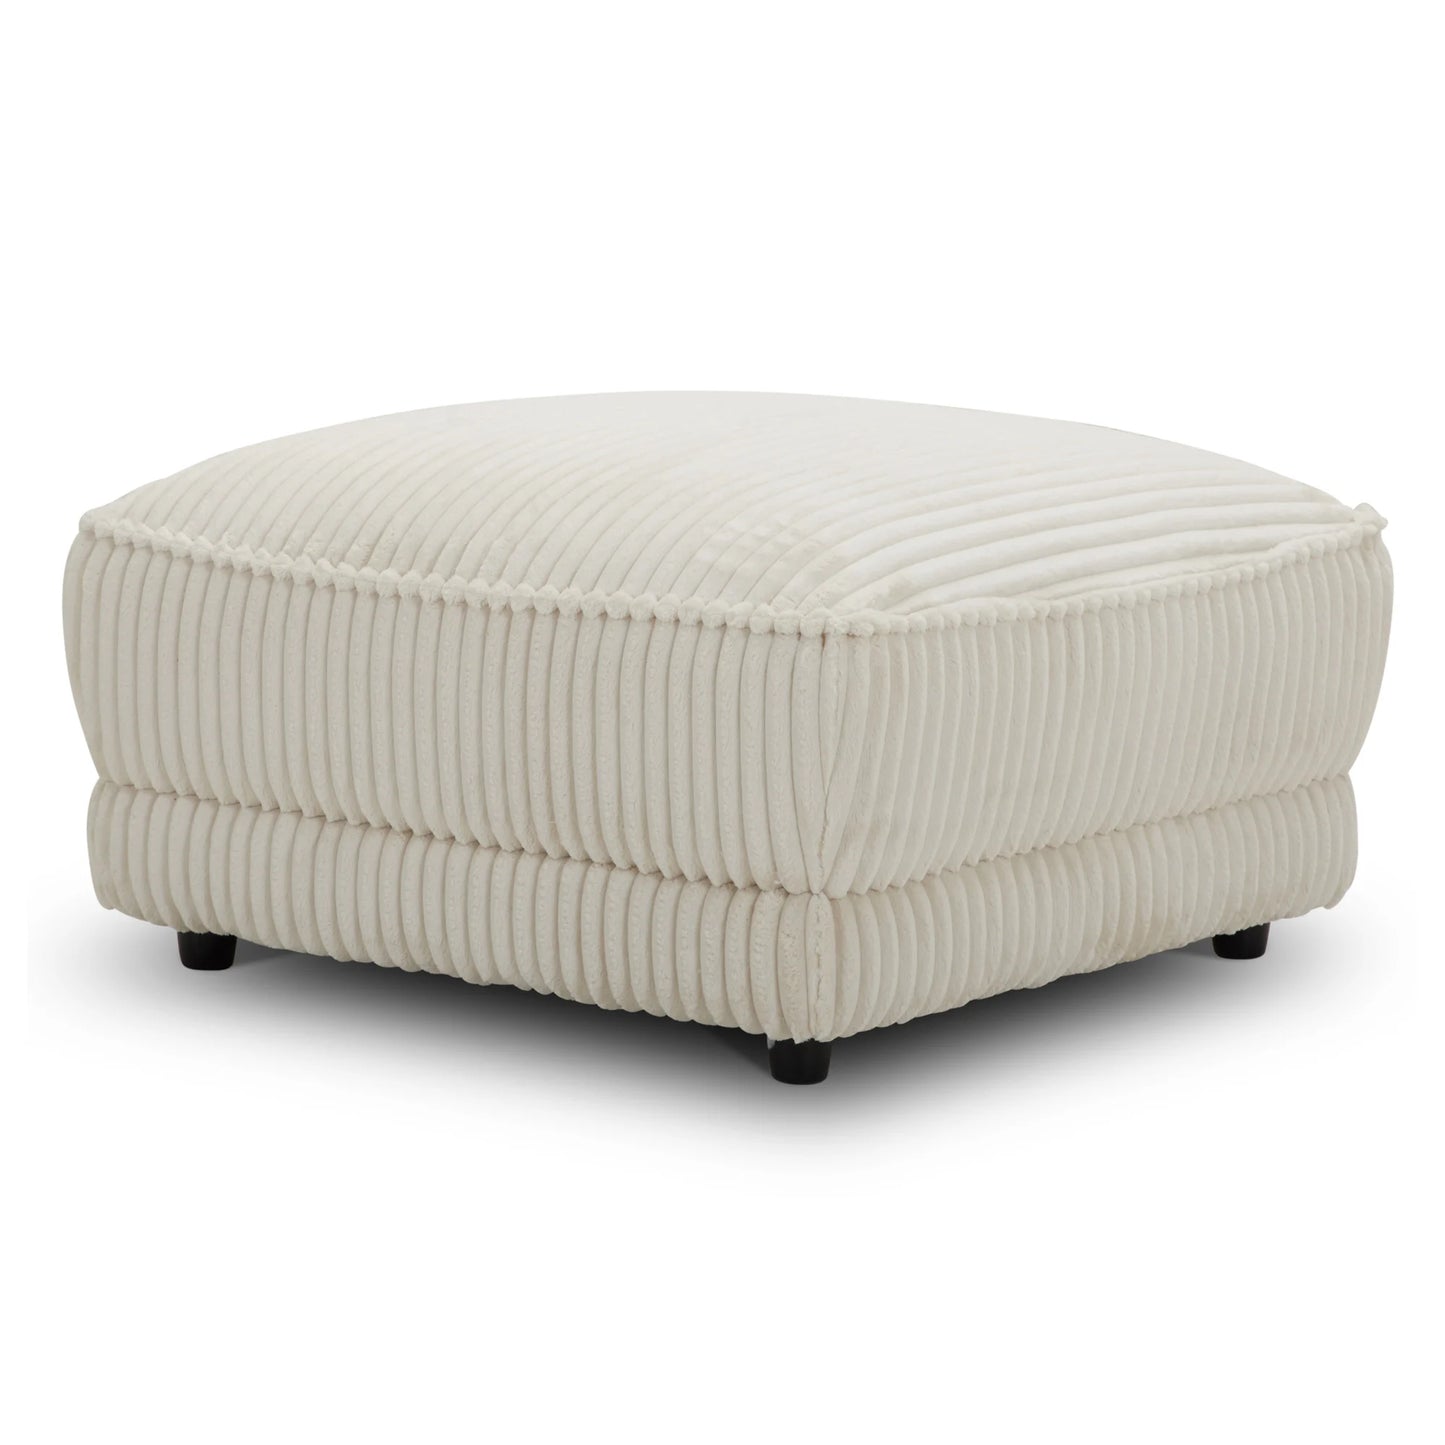 Utopia Ottoman with Casters